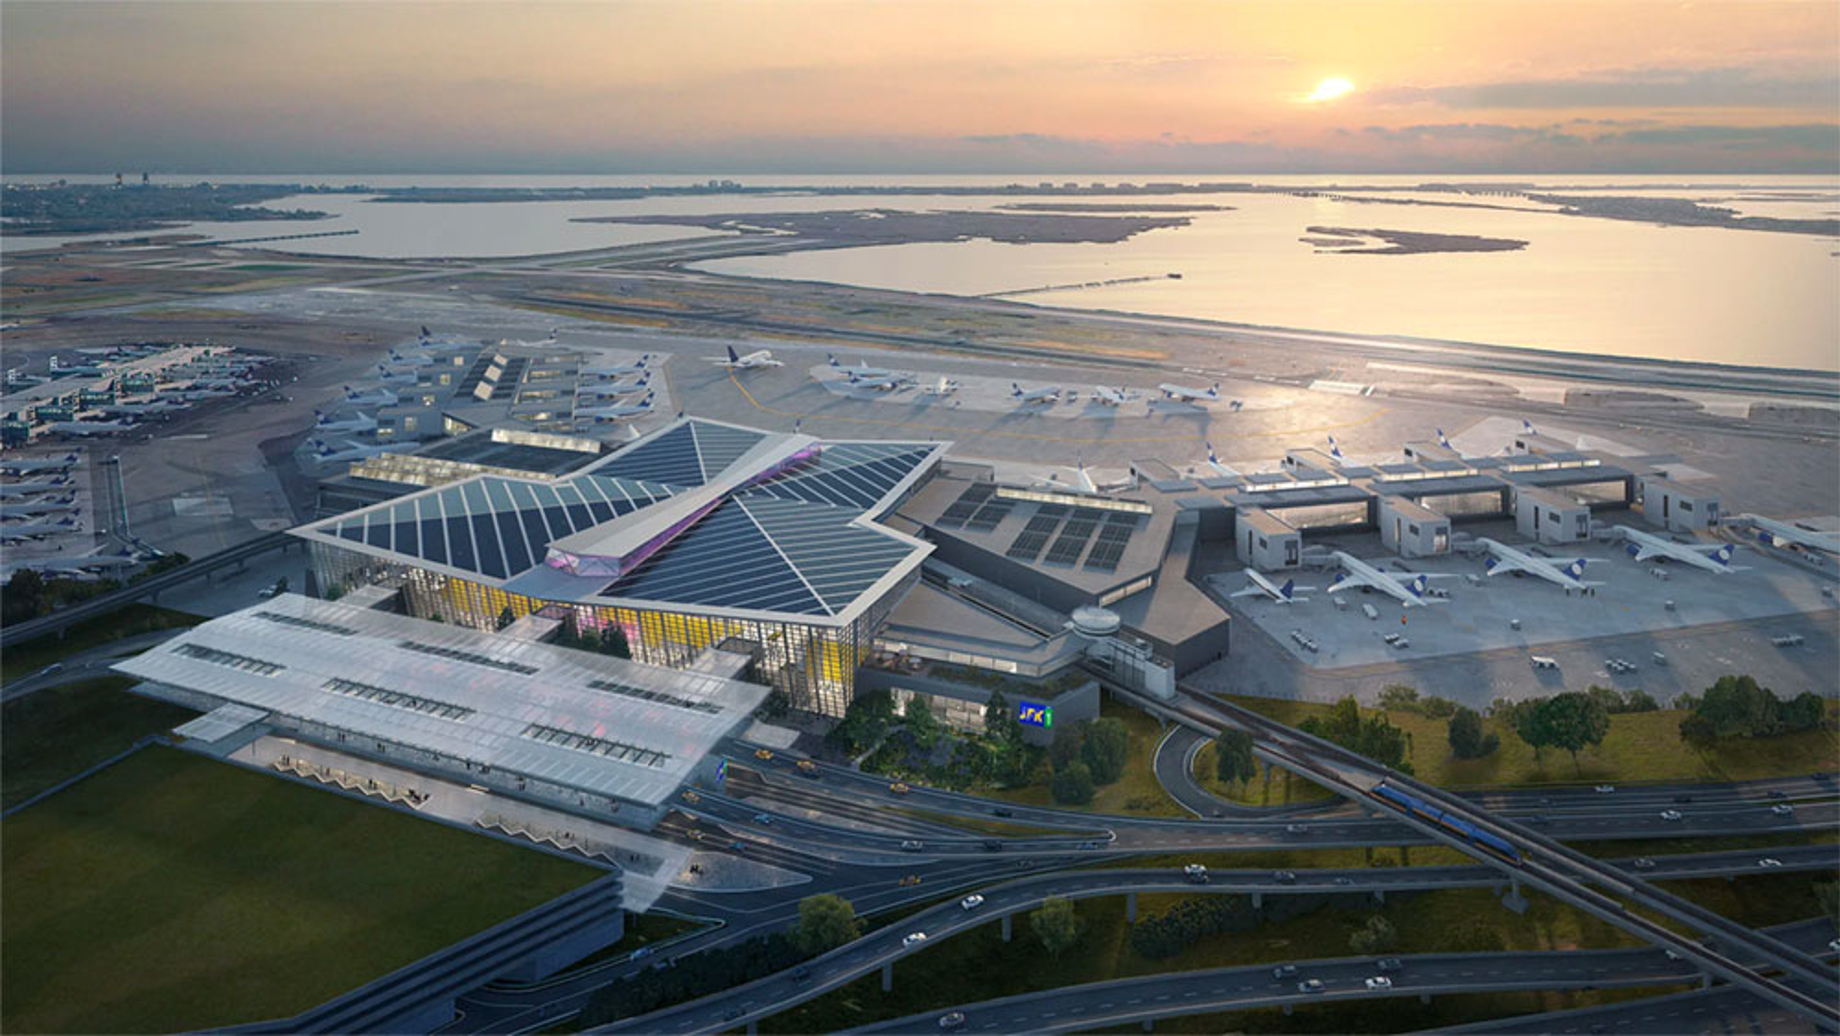 Artist's impression of the new Terminal One at JFK